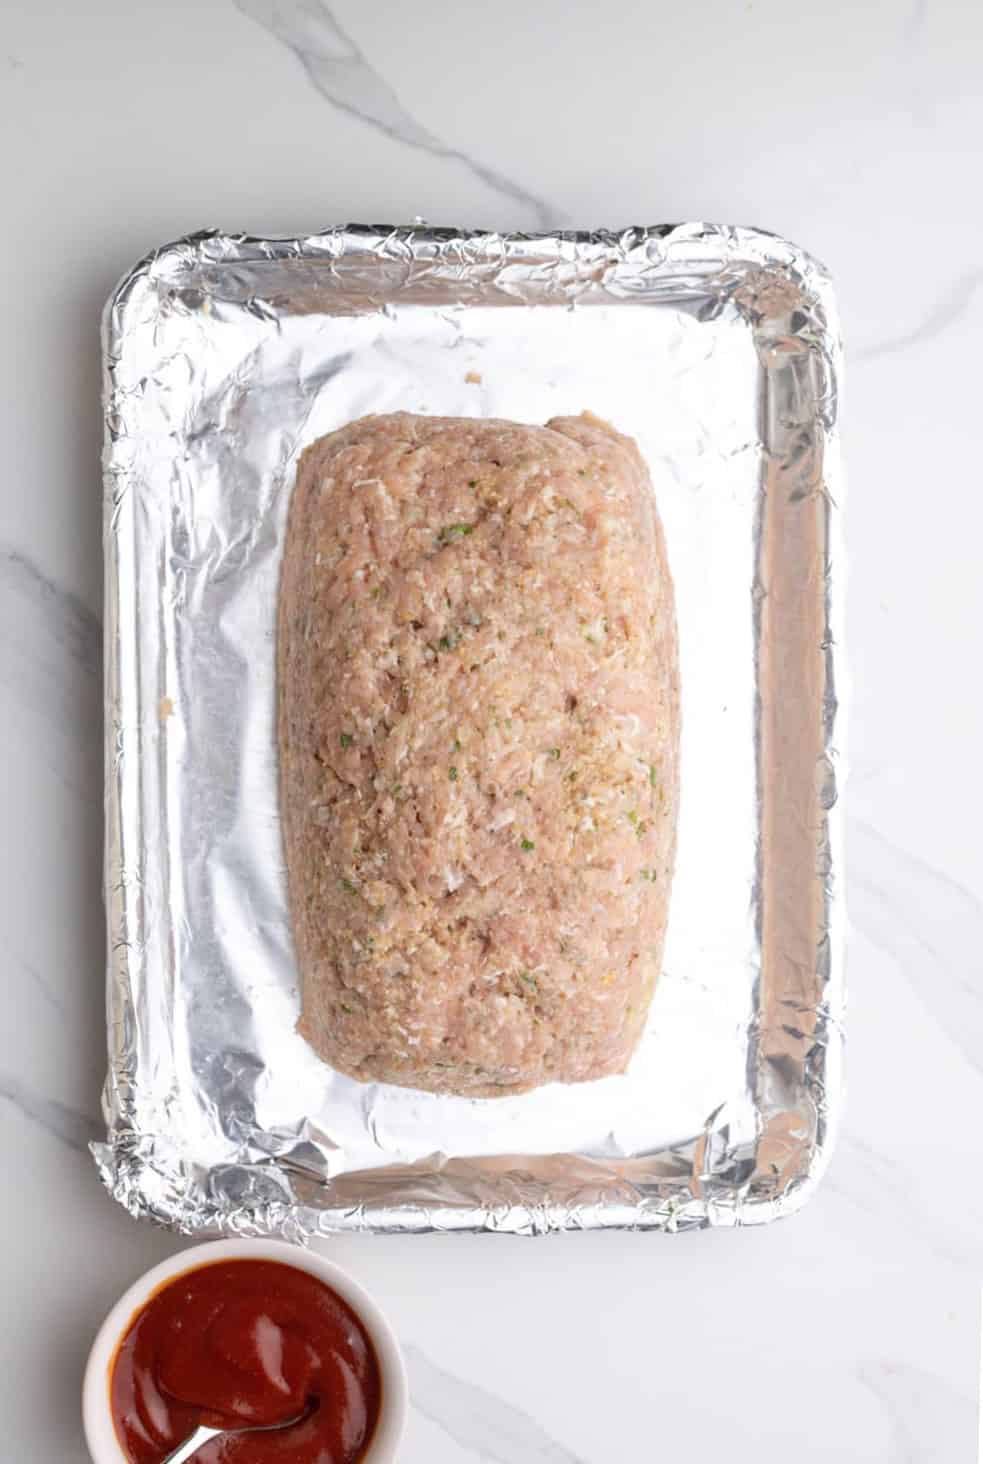 a meatloaf made with ground chicken on a sheet pan lined with foil.